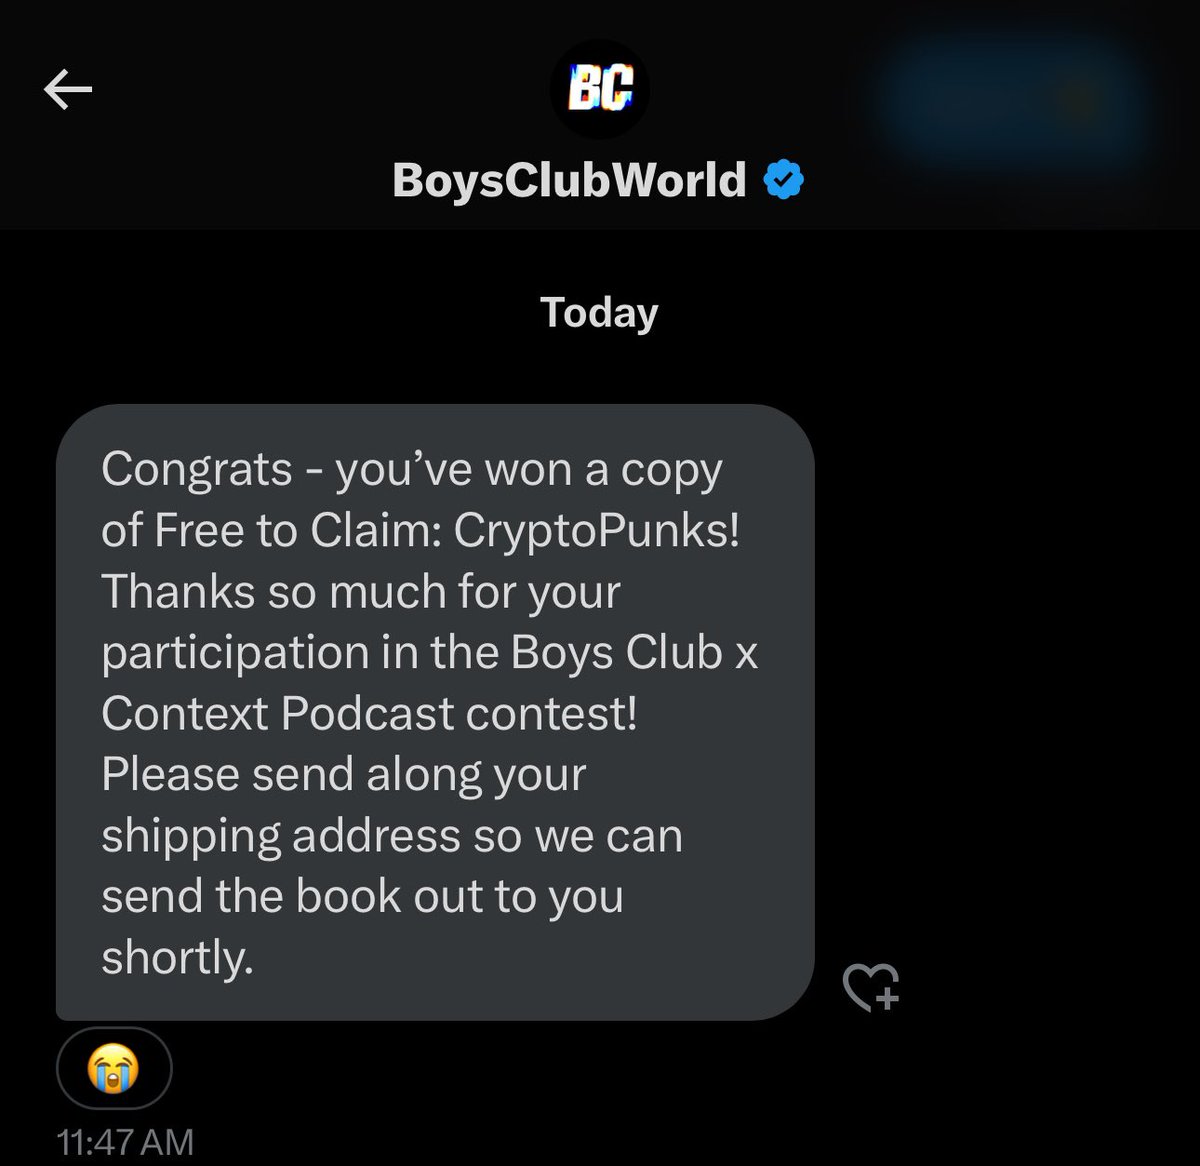 We do a little free claim of the “Free to Claim: Cryptopunks” Book!!! 📖 Love getting rewarded with things I love by doing things I already do (consume + share) The “Context” podcast hosted by @blakefinucane is one of my favs 🎙️ s/o @BoysClubWorld 🫶